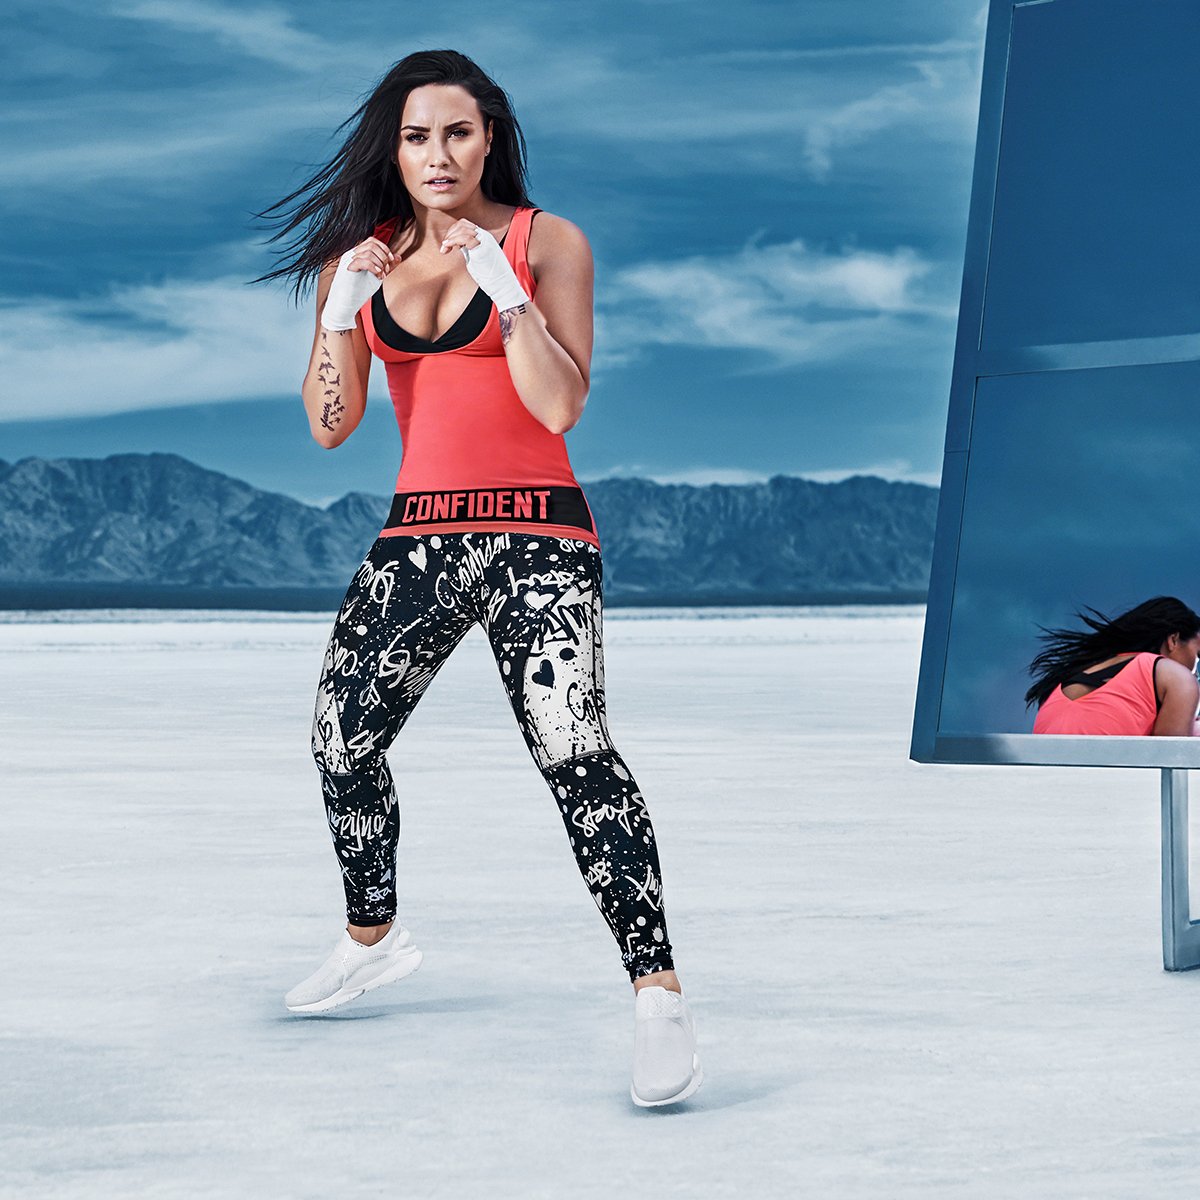 We can match in our confident tanks if you grab one from the #Demi4Fabletics collection ???? https://t.co/GKN6sj78W6 https://t.co/i6jMtkIvyp